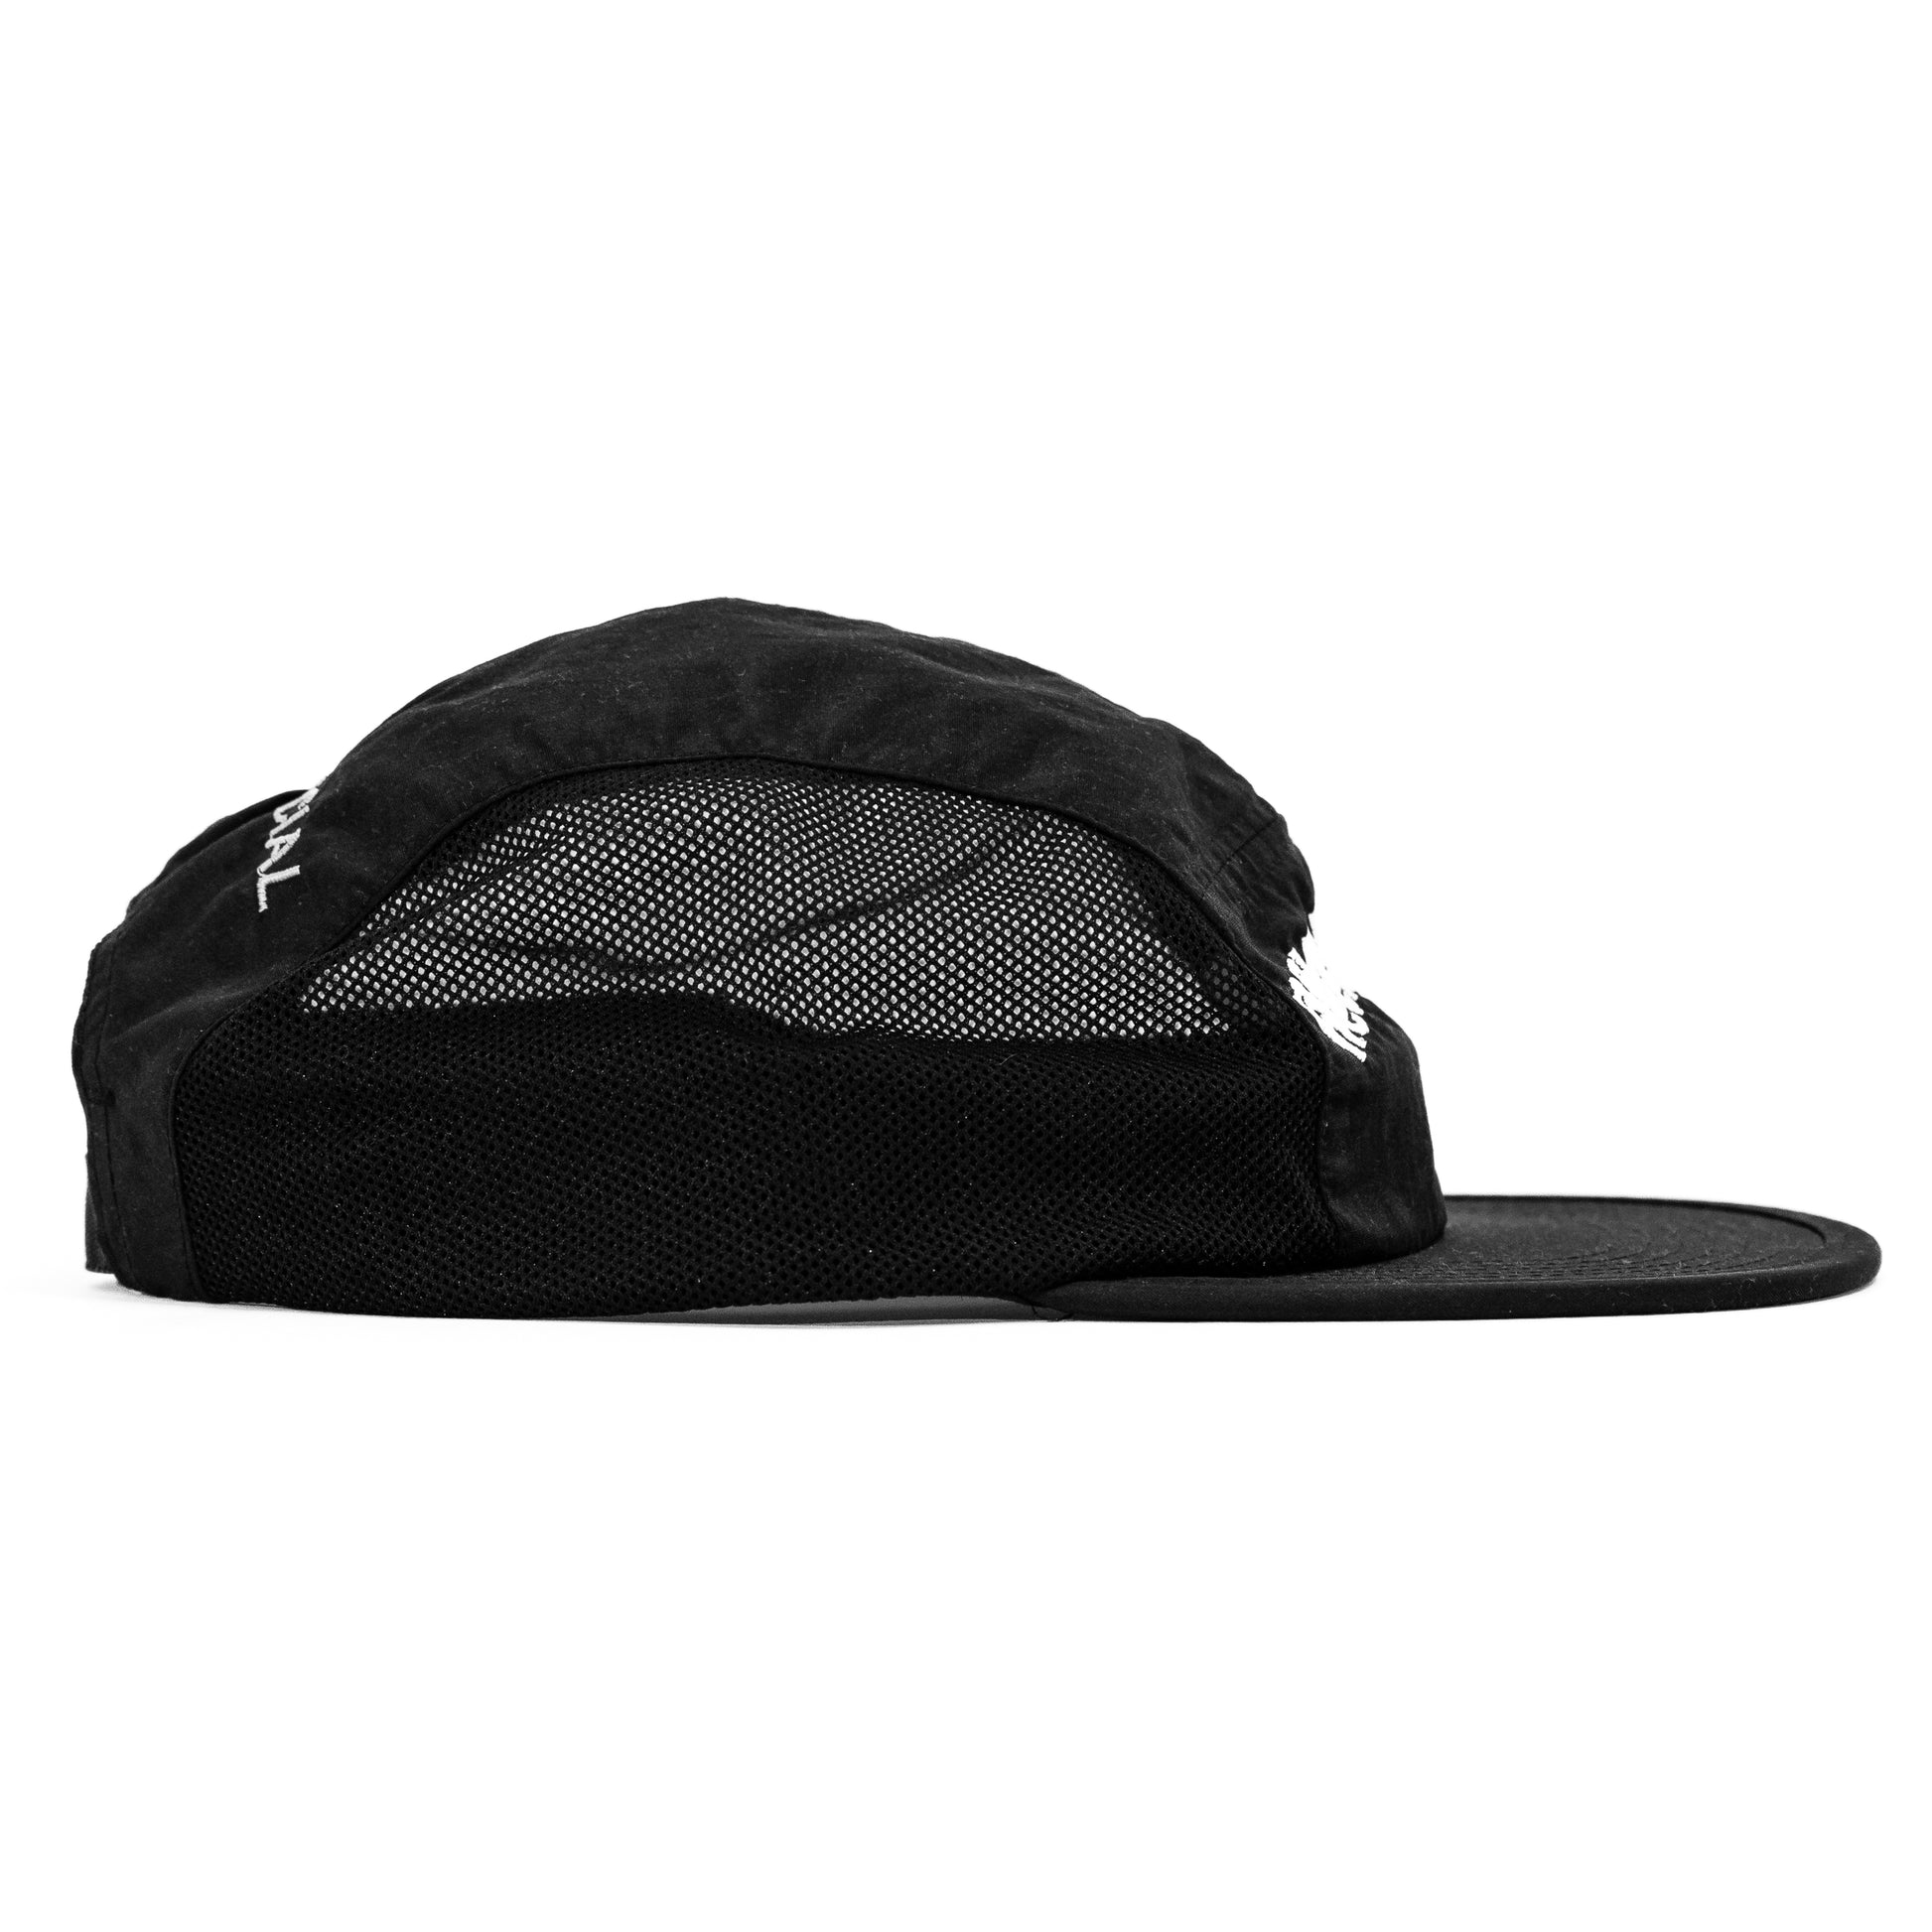 Never No More 5 Panel Hat, Black - Layr Official